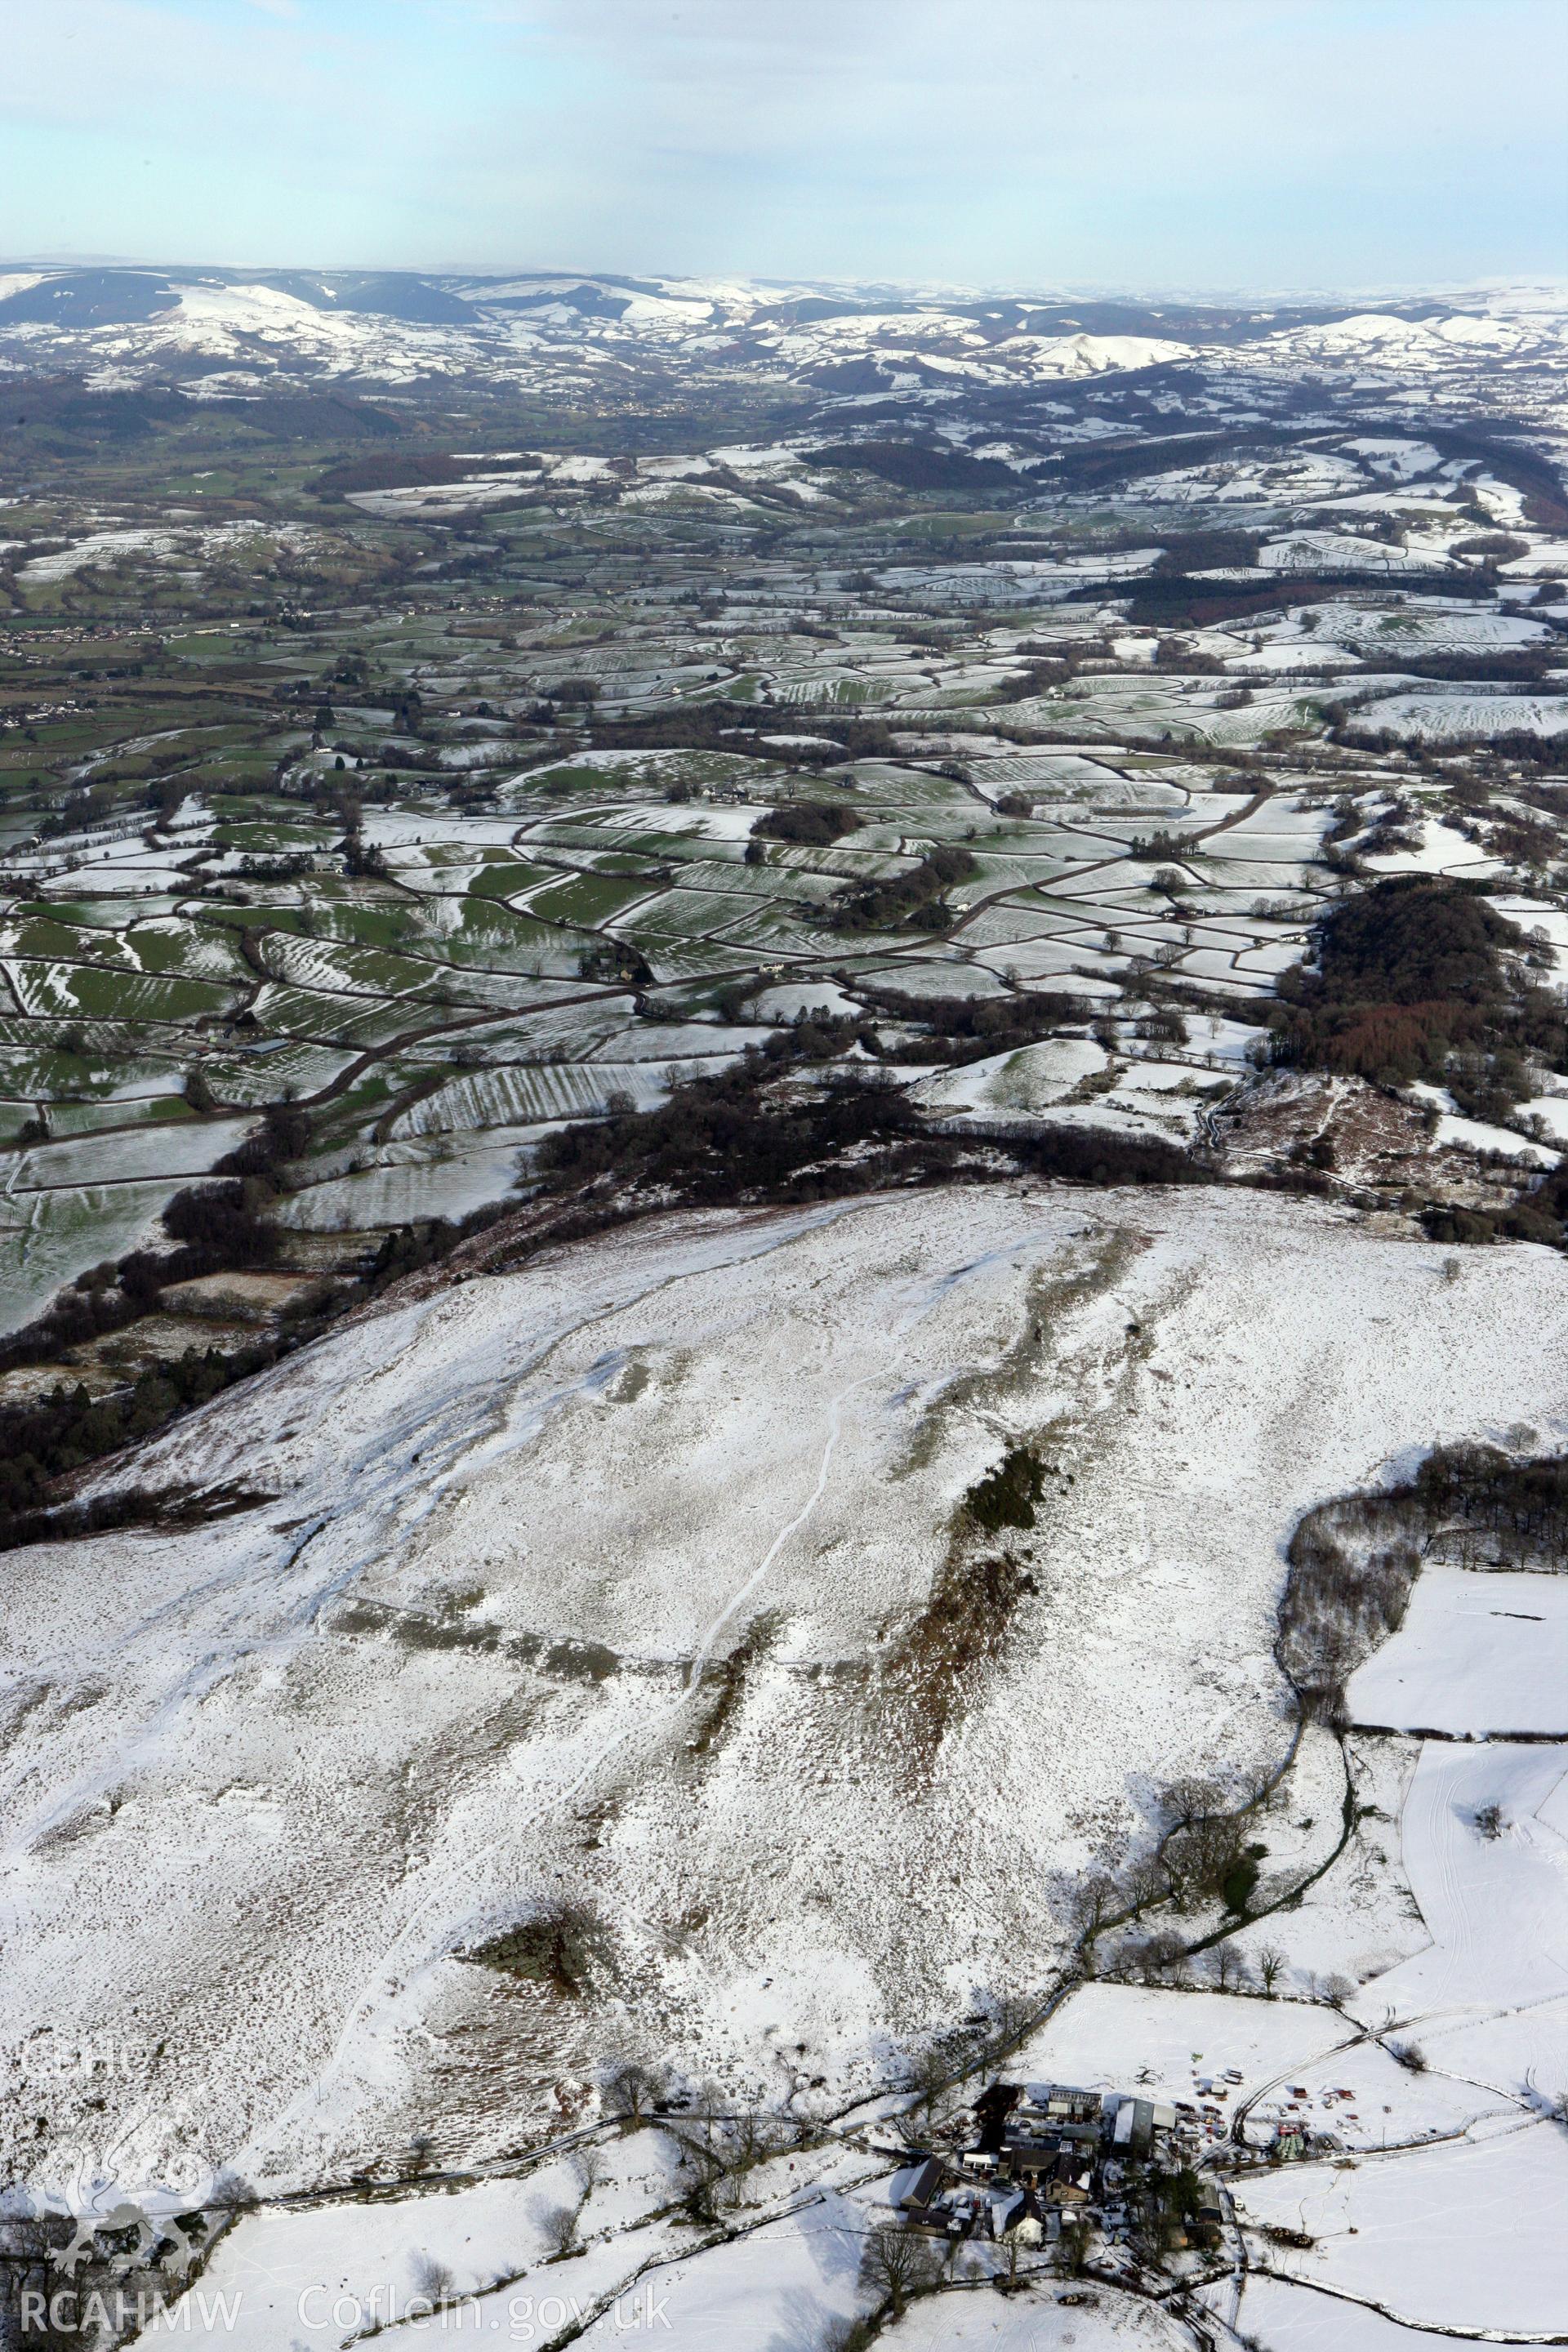 RCAHMW colour oblique photograph of Y Gaer Fawr hillfort on Carn Goch, under snow. Taken by Toby Driver on 06/02/2009.